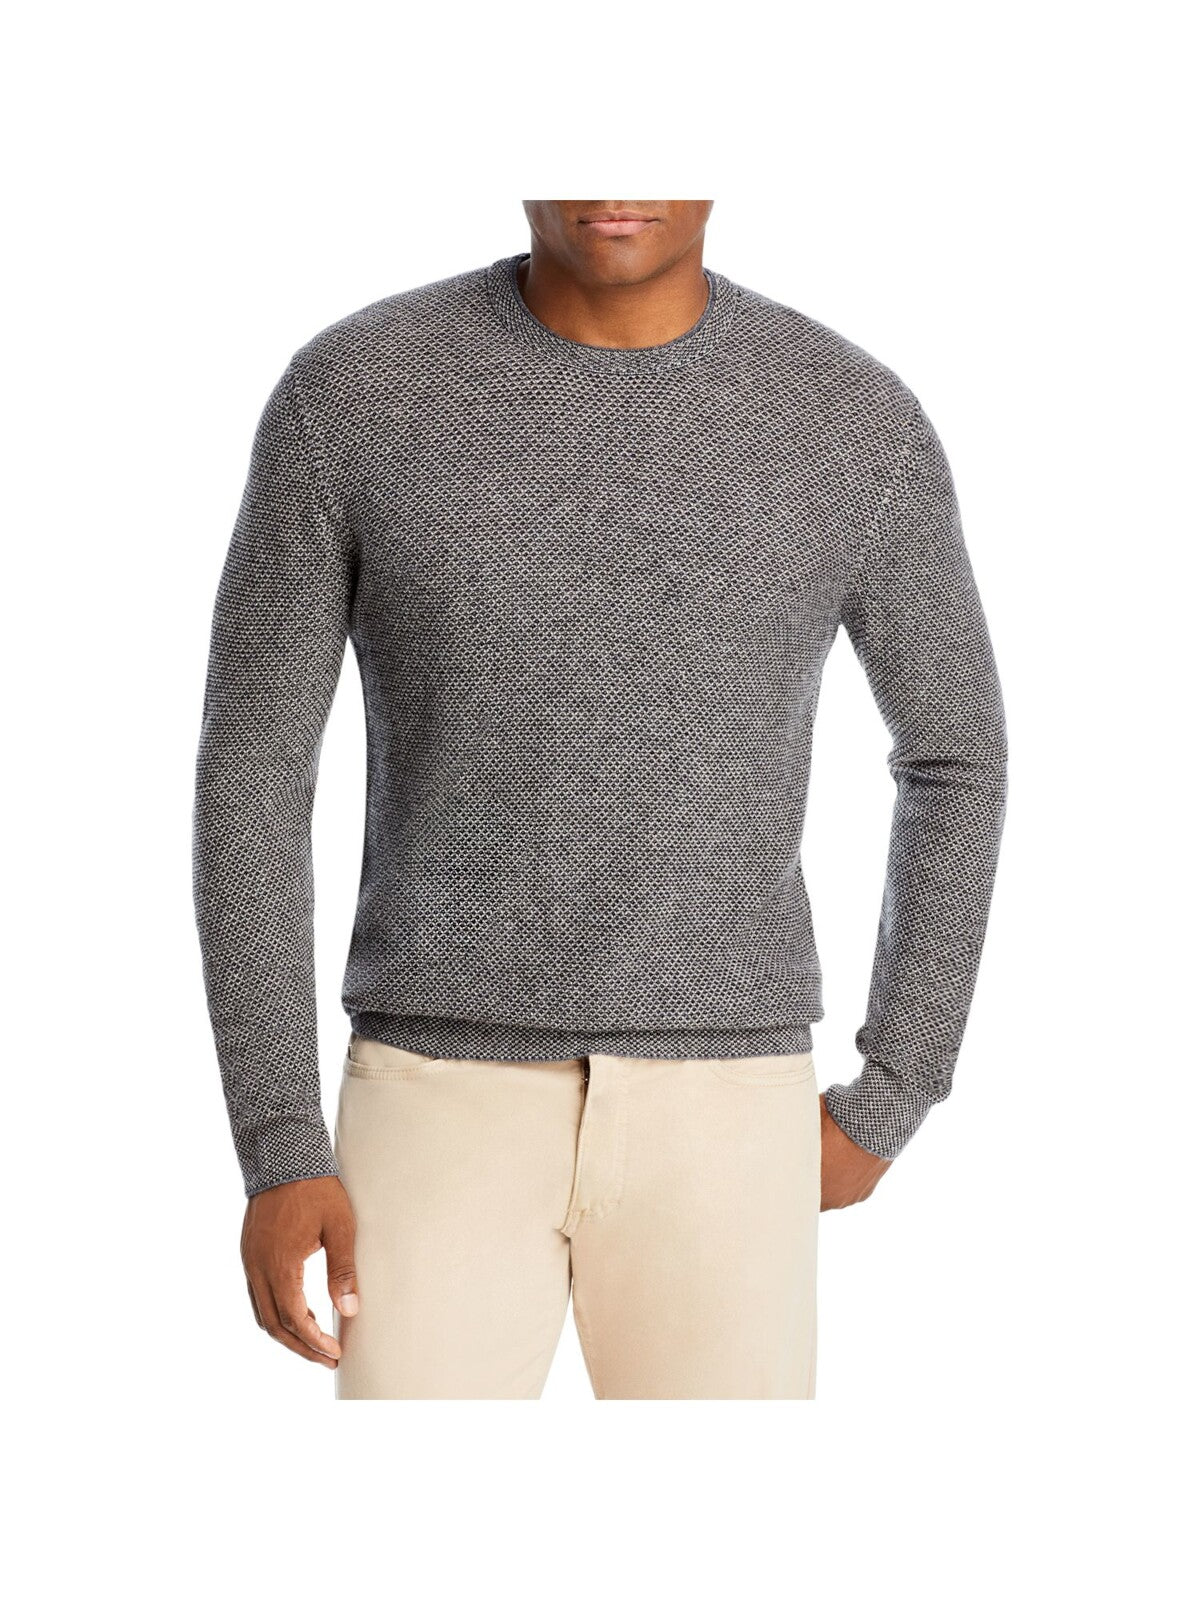 THE MENS STORE Mens Gray Patterned Crew Neck Knit Pullover Sweater XL